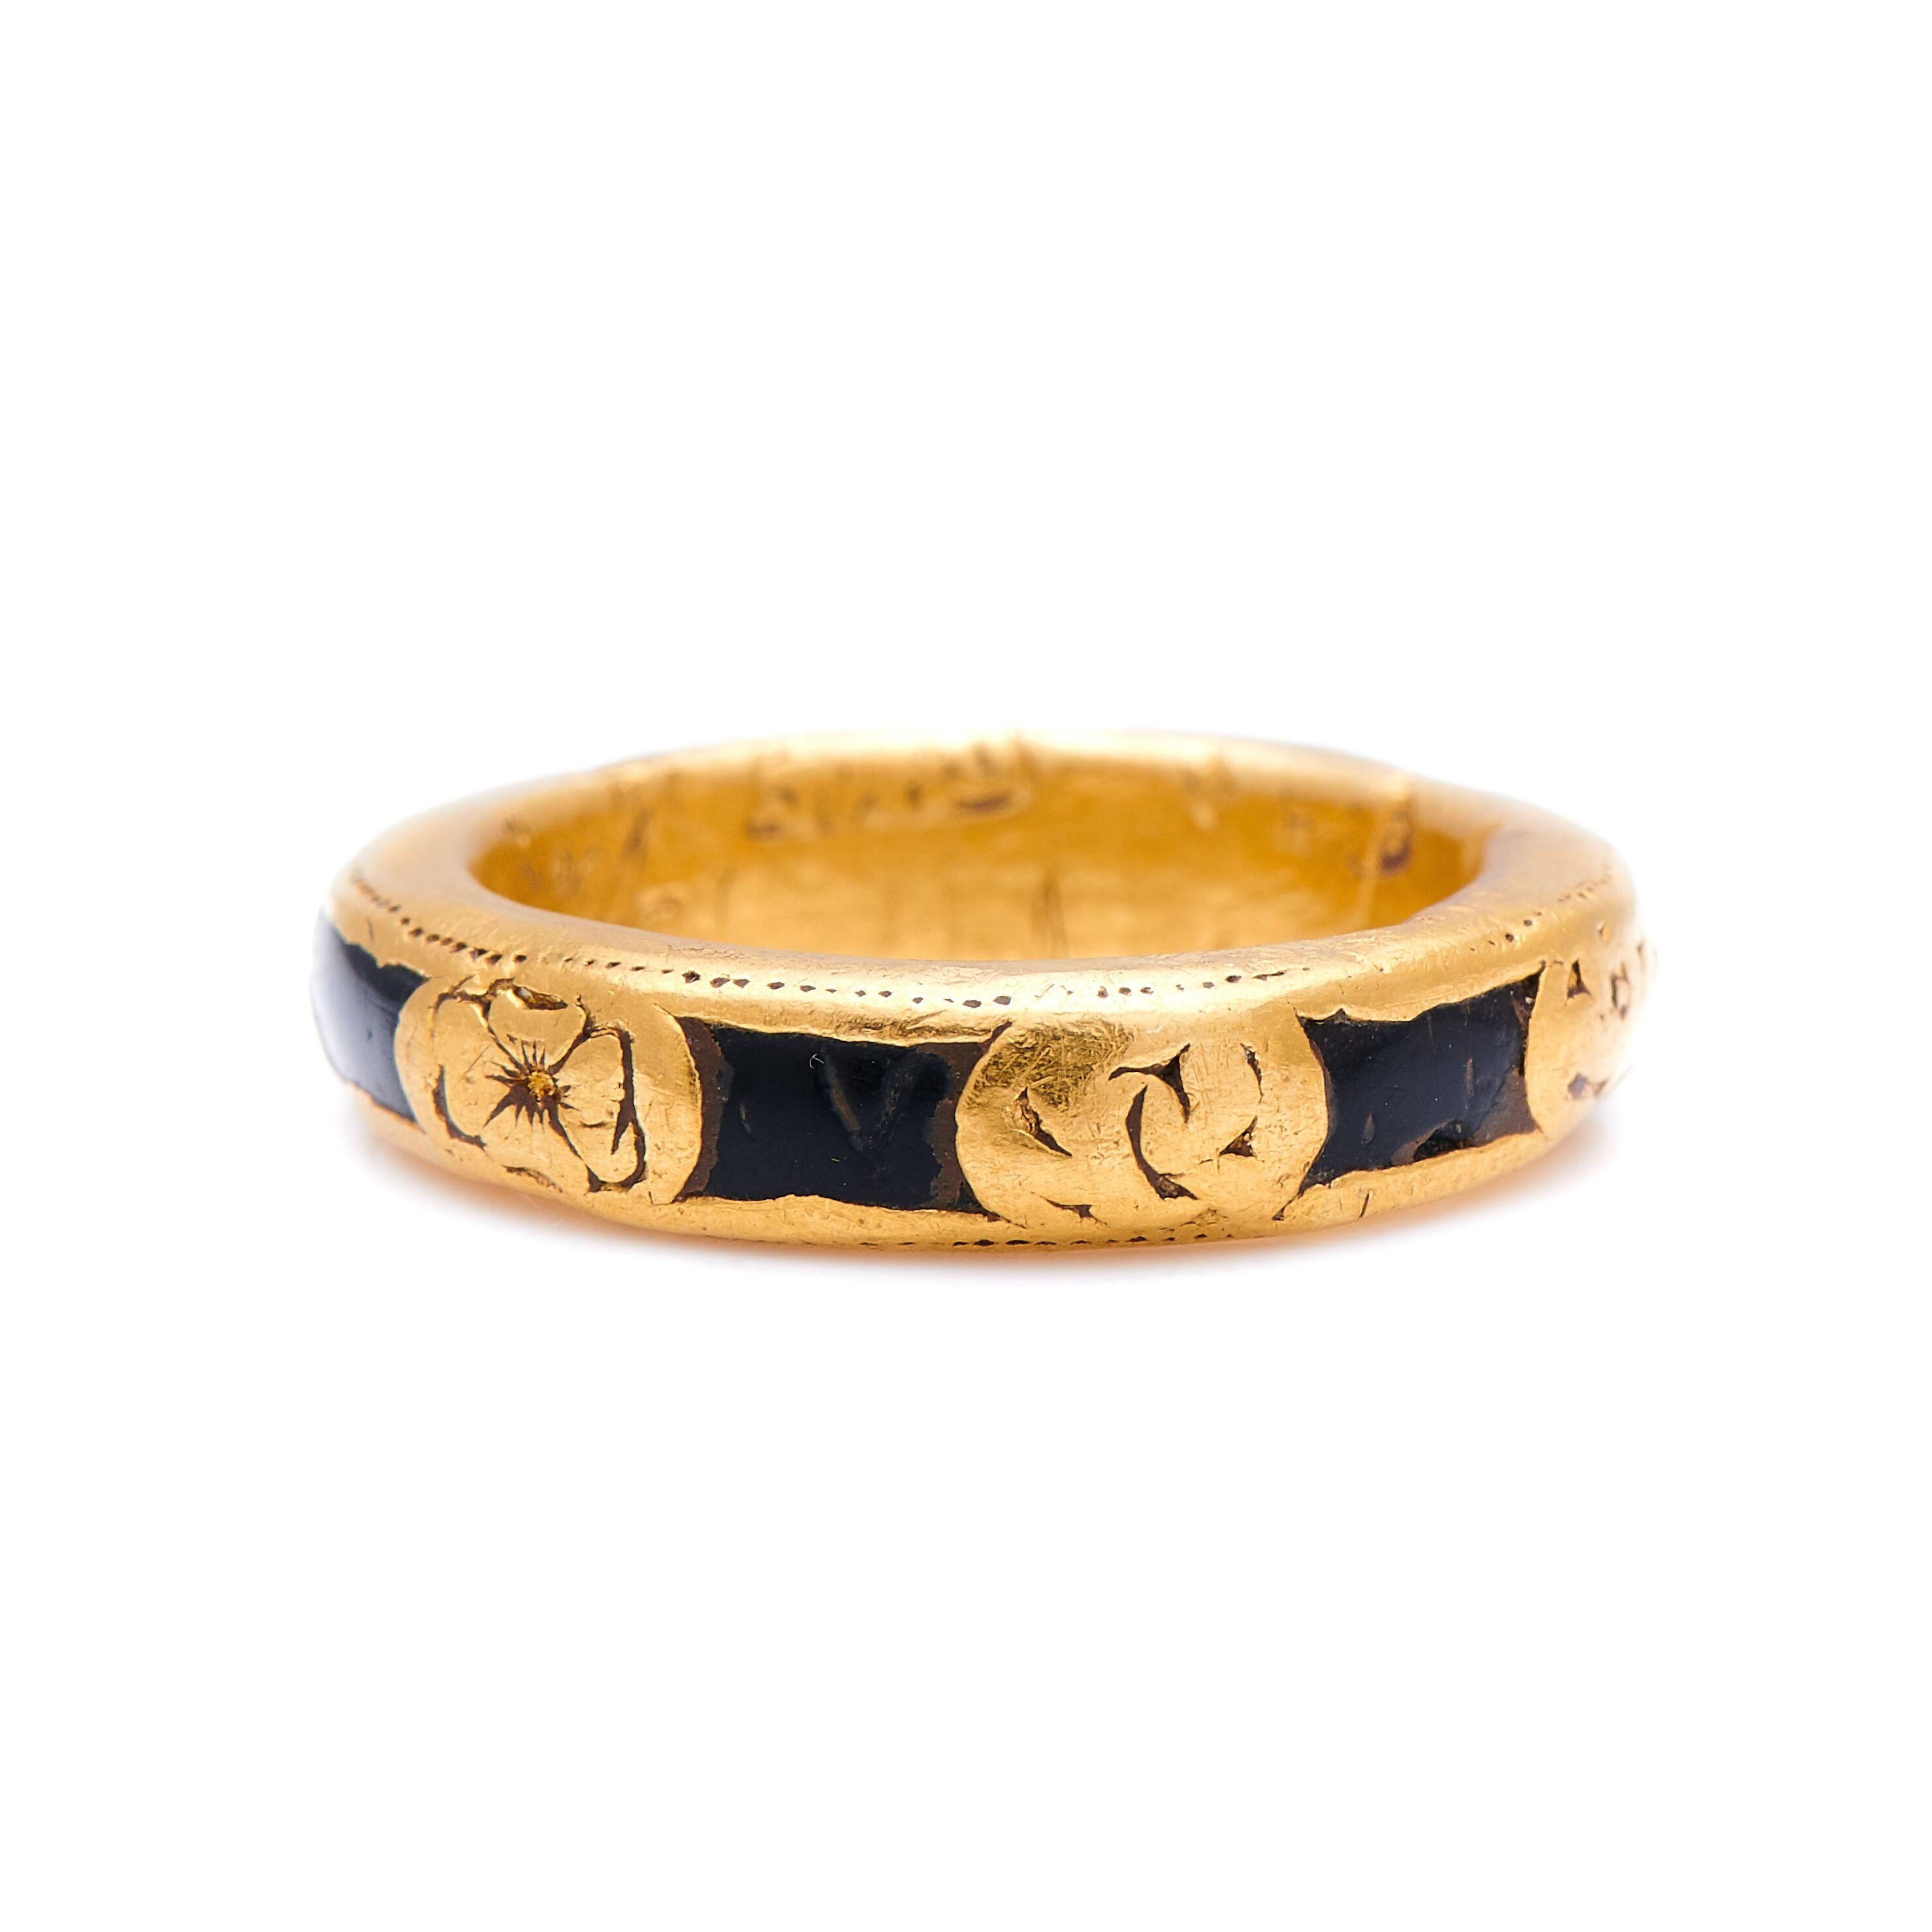 Gold, enamel ring, circa 1750. An exceptional, fine quality memento mori ring detailed with enamel and carved a skull, a rose and pumpkin heads. It’s a truly exceptional, and rare, piece of history in remarkable condition. The gold has tarnished